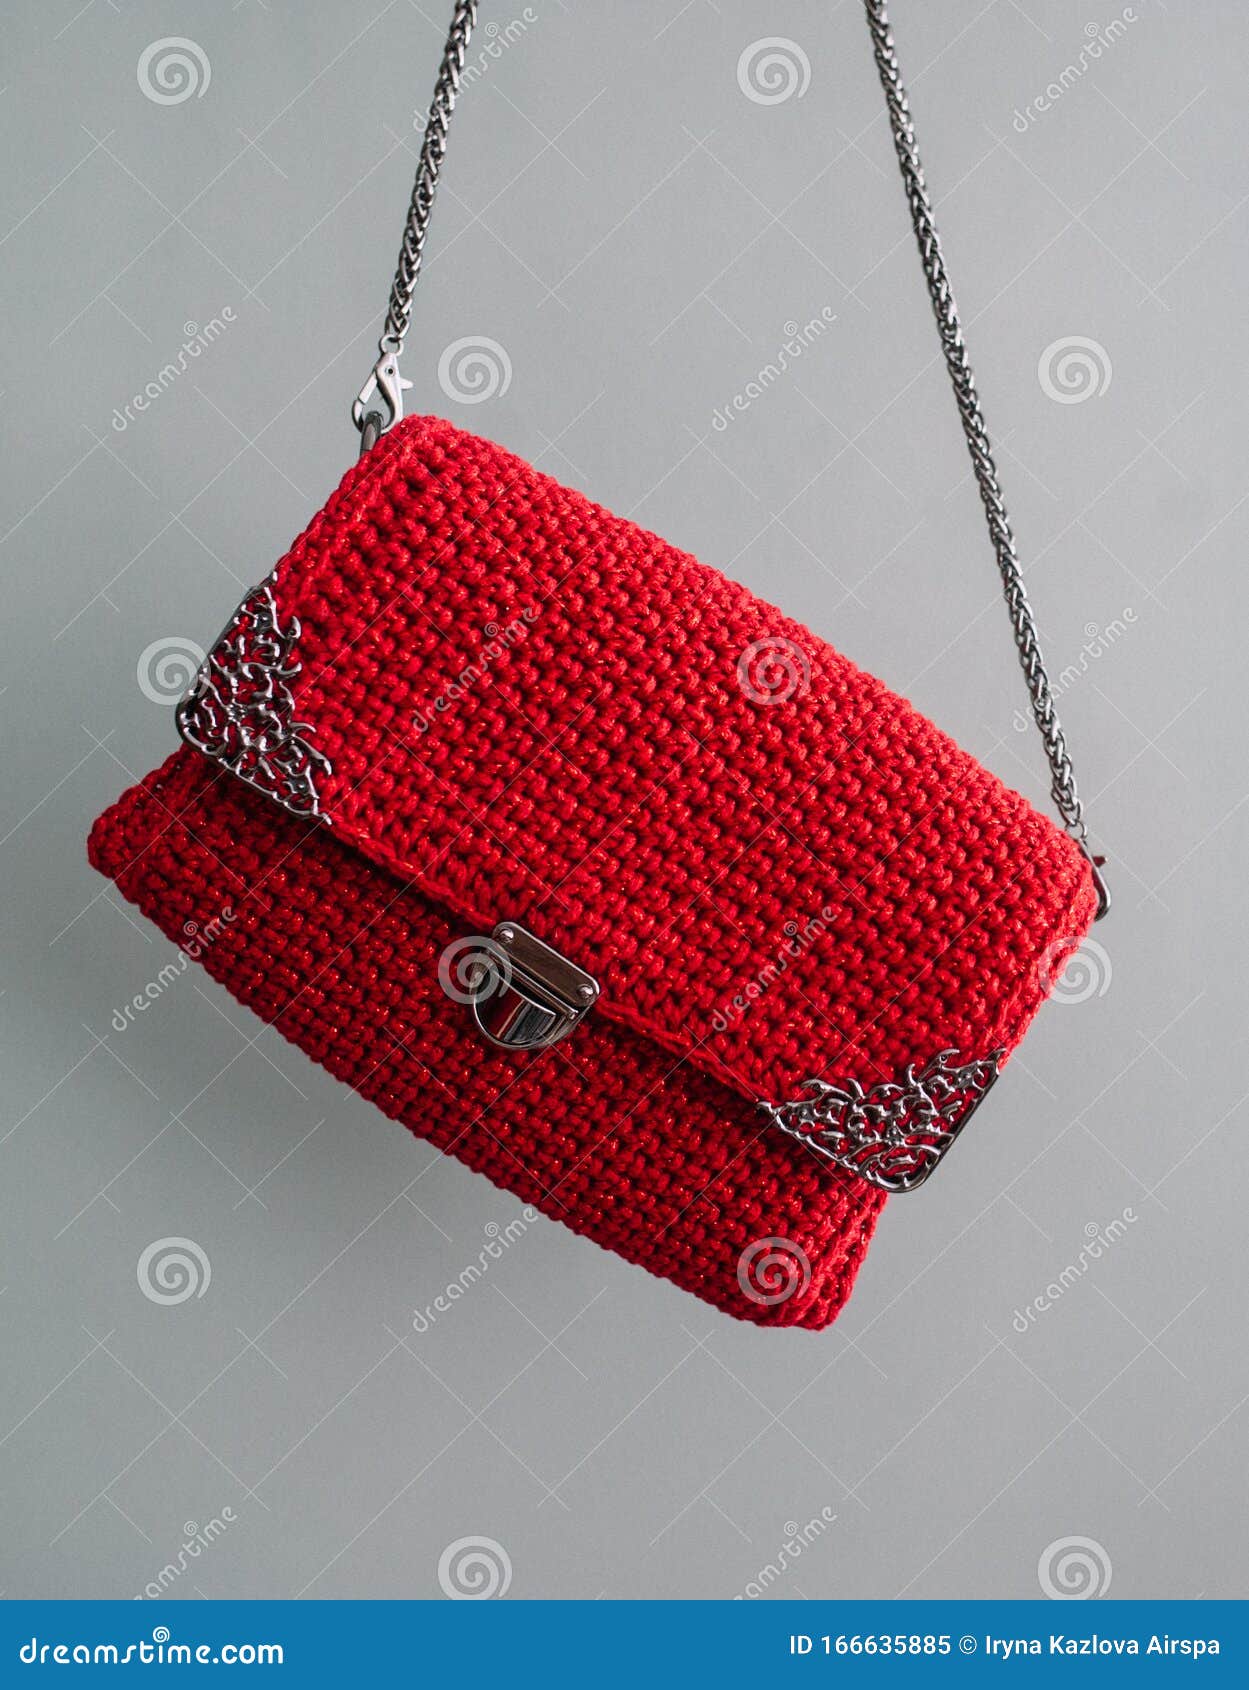 Red Crochet Knitted Bag ,made from Nylon Thread Isolated on Gray